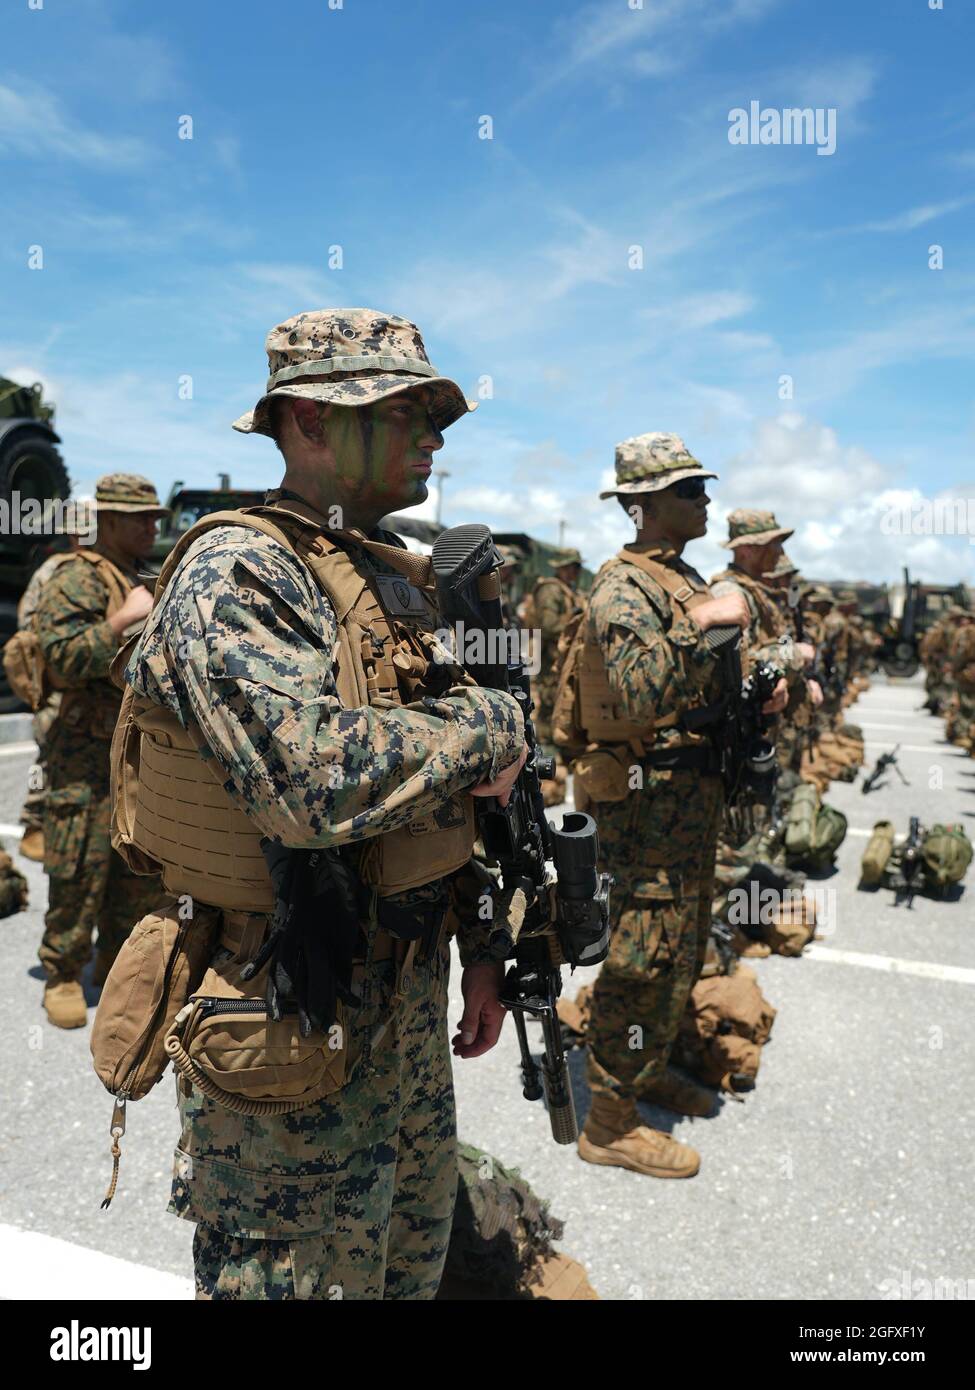 U.S. Marines with Combat Logistics Battalion 4, 3d Marine Logistics Group, and 2d Battalion, 3d Marines, 3d Marine Division, conduct an integrated rapid response inspection at Kadena Air Base, Okinawa, Japan, August 25, 2021. Routine short-notice inspections ensure III MEF Marines remain ready to rapidly deploy and maintain regional security in the Indo-Pacific. 3d MLG, based out of Okinawa, Japan, is a forward deployed combat unit that serves as III Marine Expeditionary Force’s comprehensive logistics and combat service support backbone for operations throughout the Indo-Pacific area of respo Stock Photo